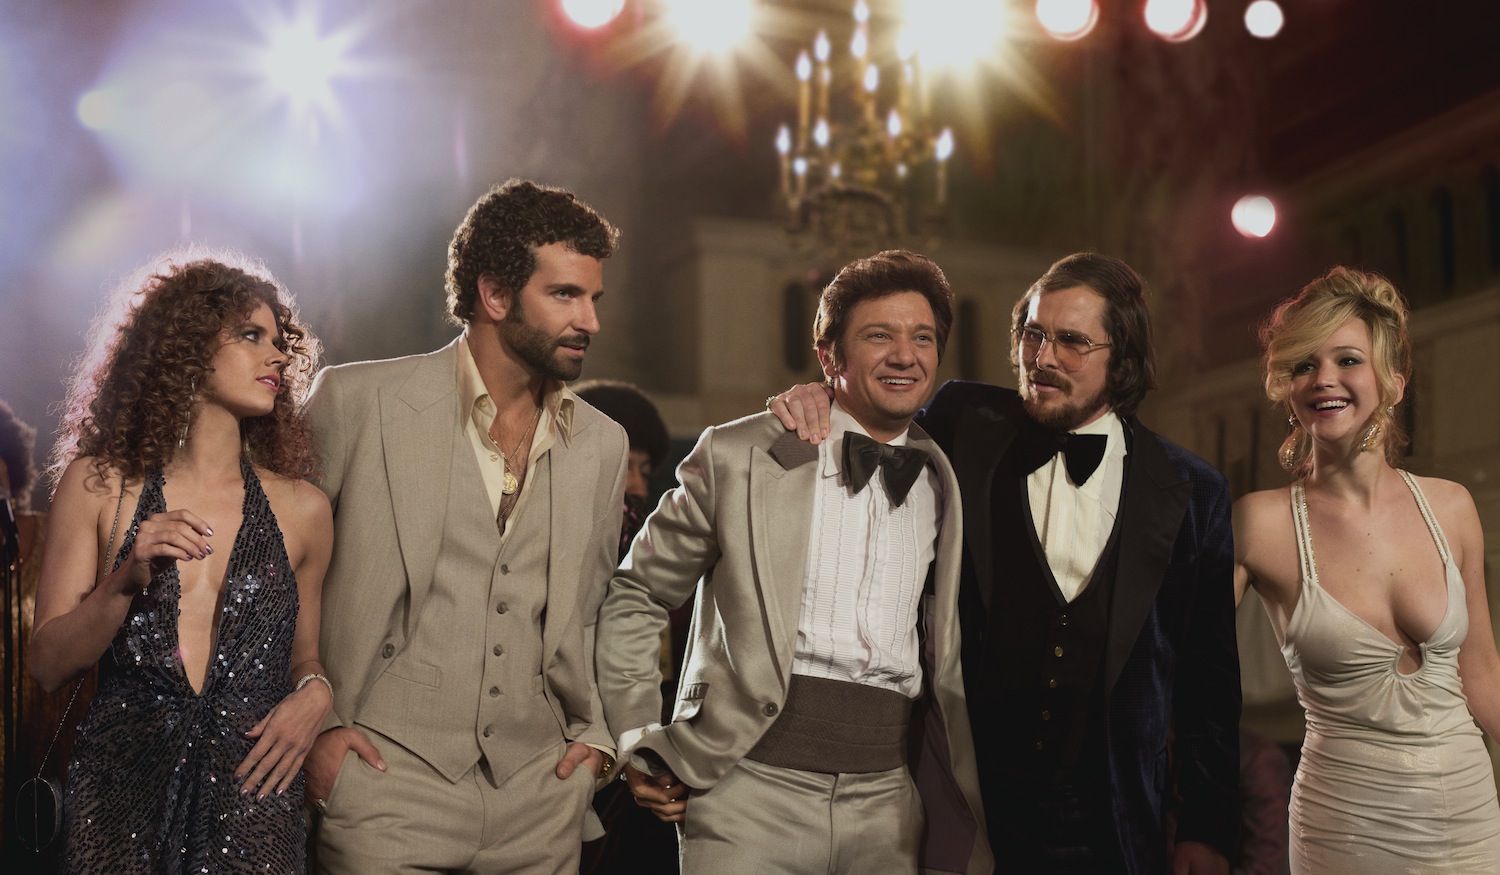 ‘American Hustle’: 6 Questions With The Cast